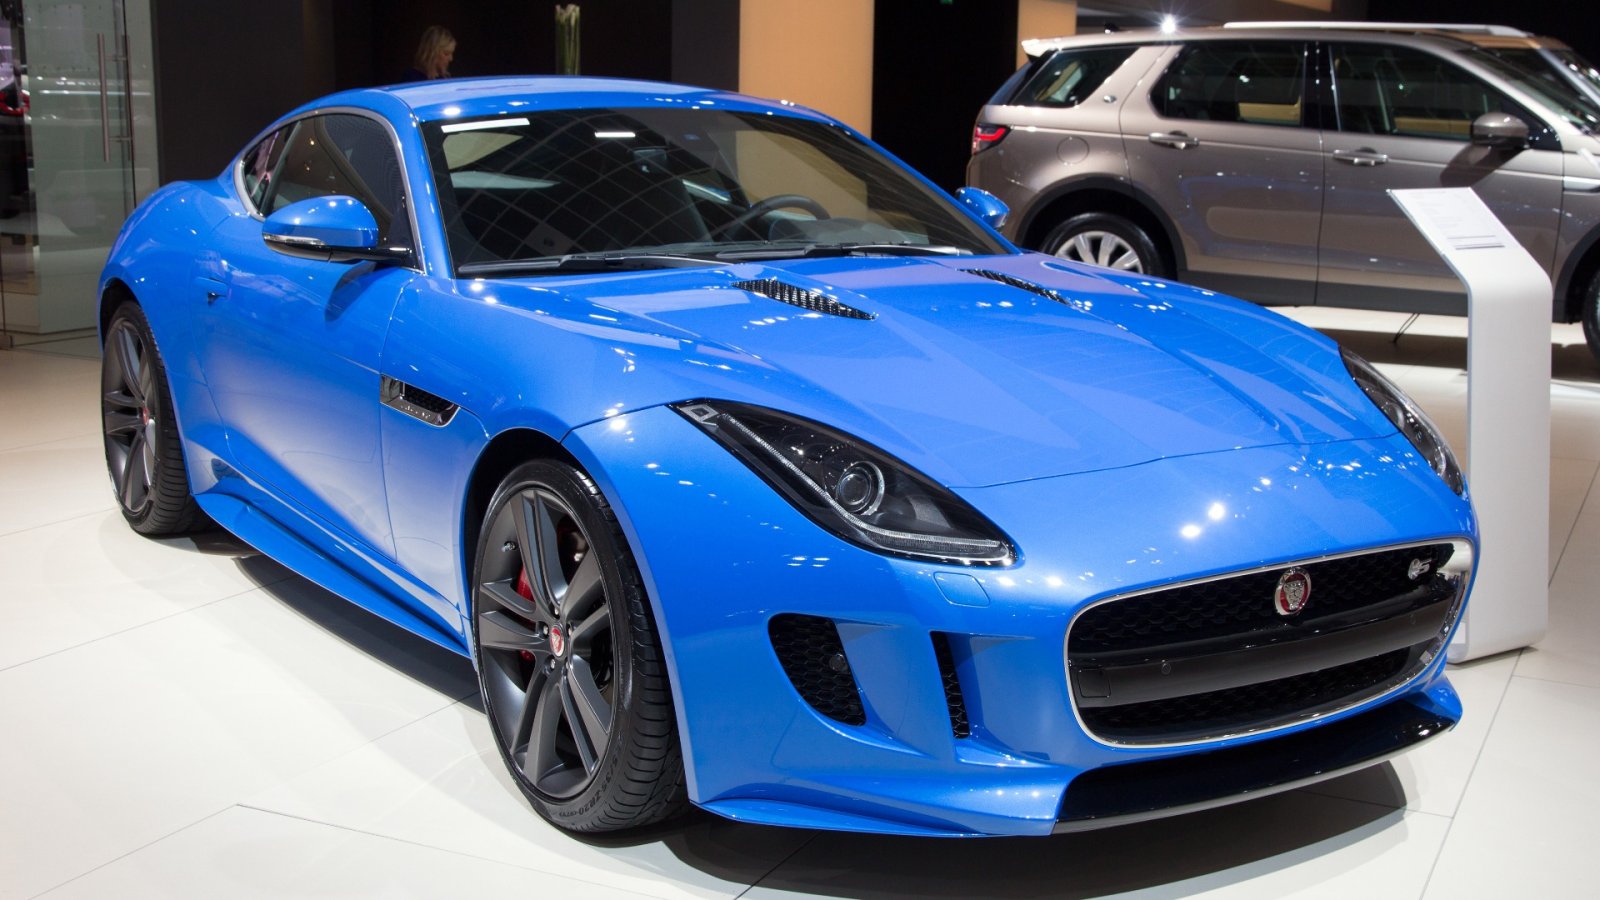 A most exhilarating driving experience: the new F-Type R75 Coupe from Jaguar